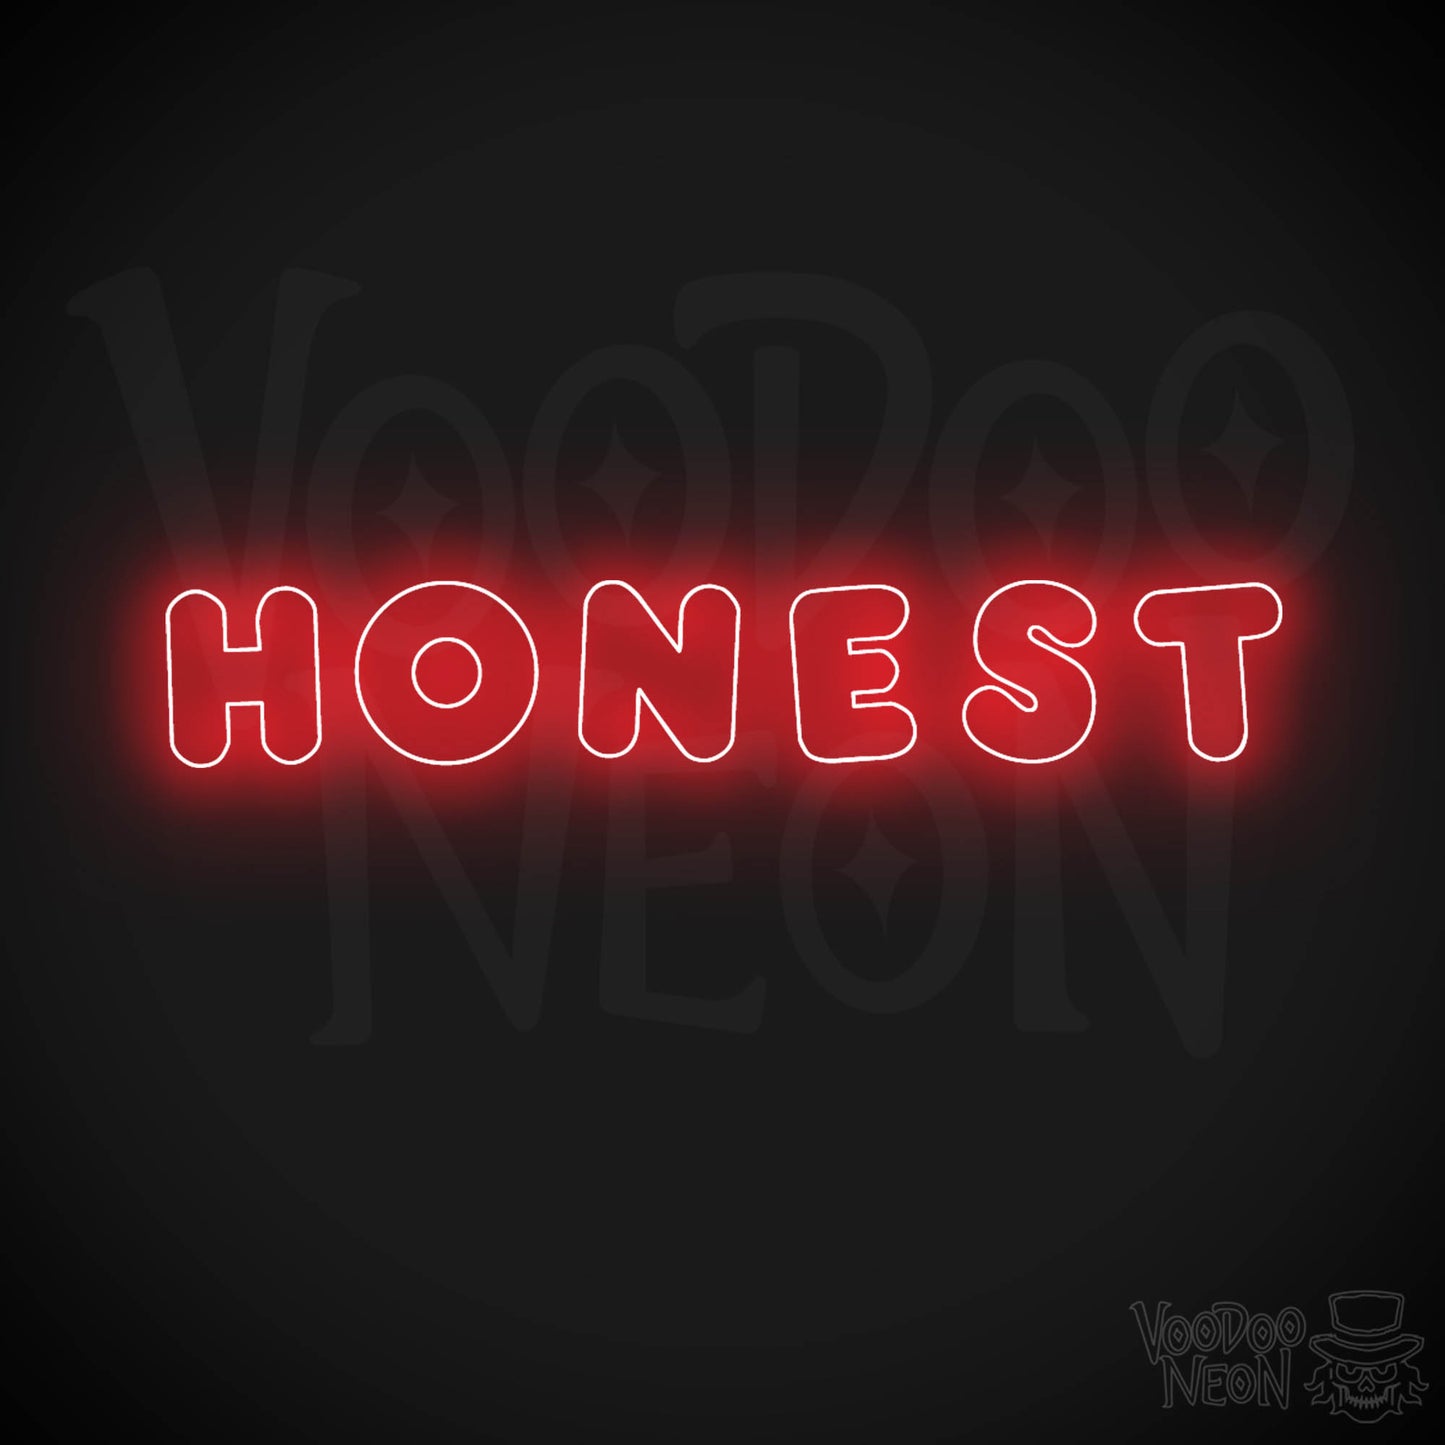 Honest Neon Sign - Neon Honest Sign - LED Neon Wall Art - Color Red